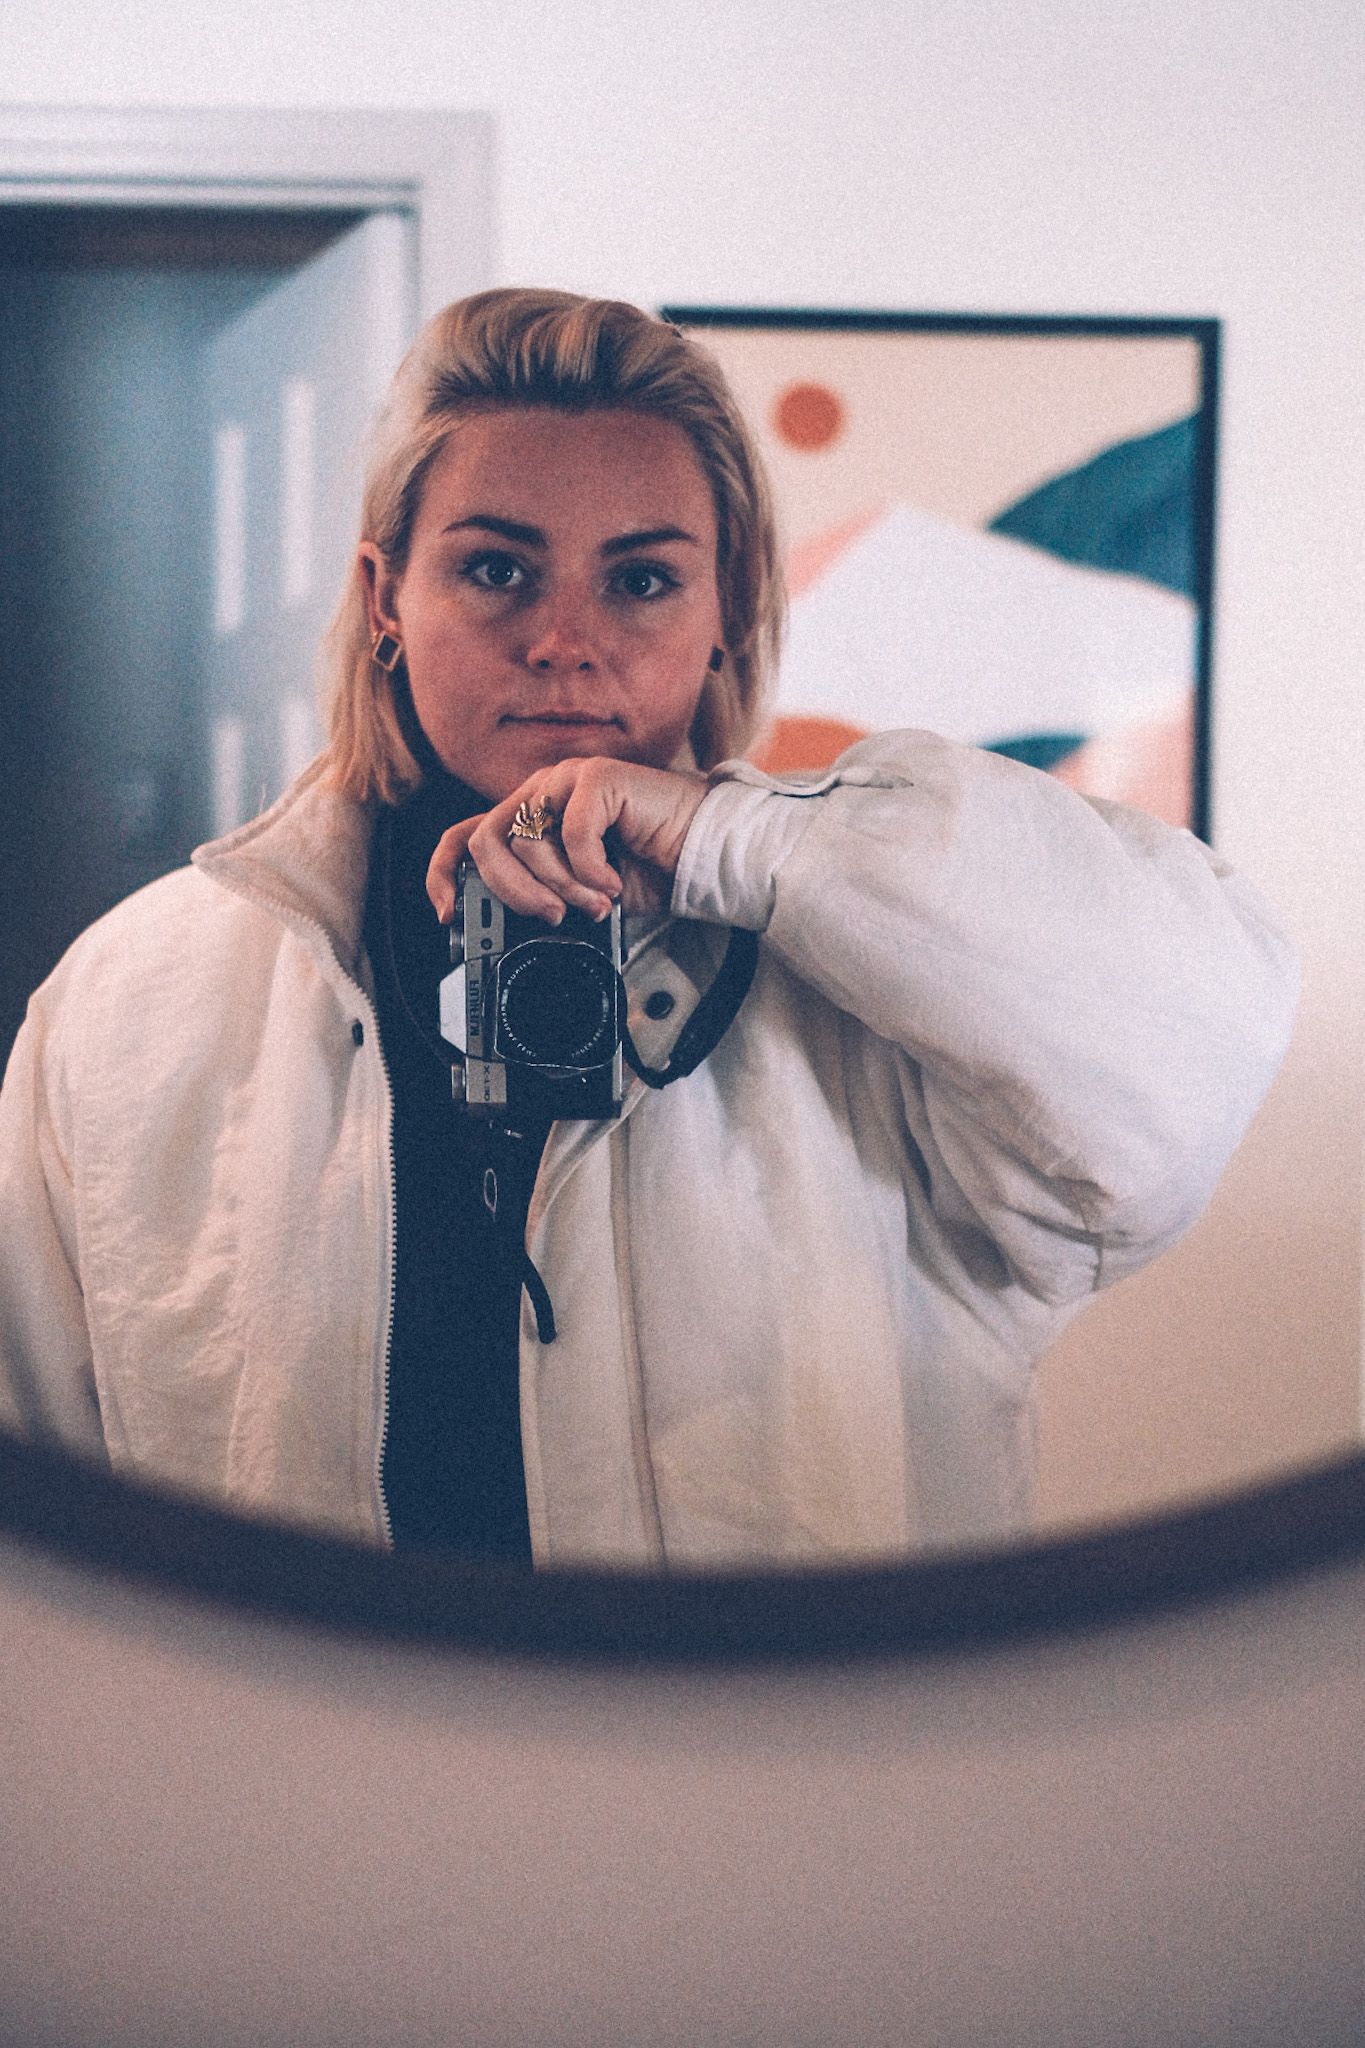 The author takes a self-portrait in a mirror, wearing a puffy white coat.